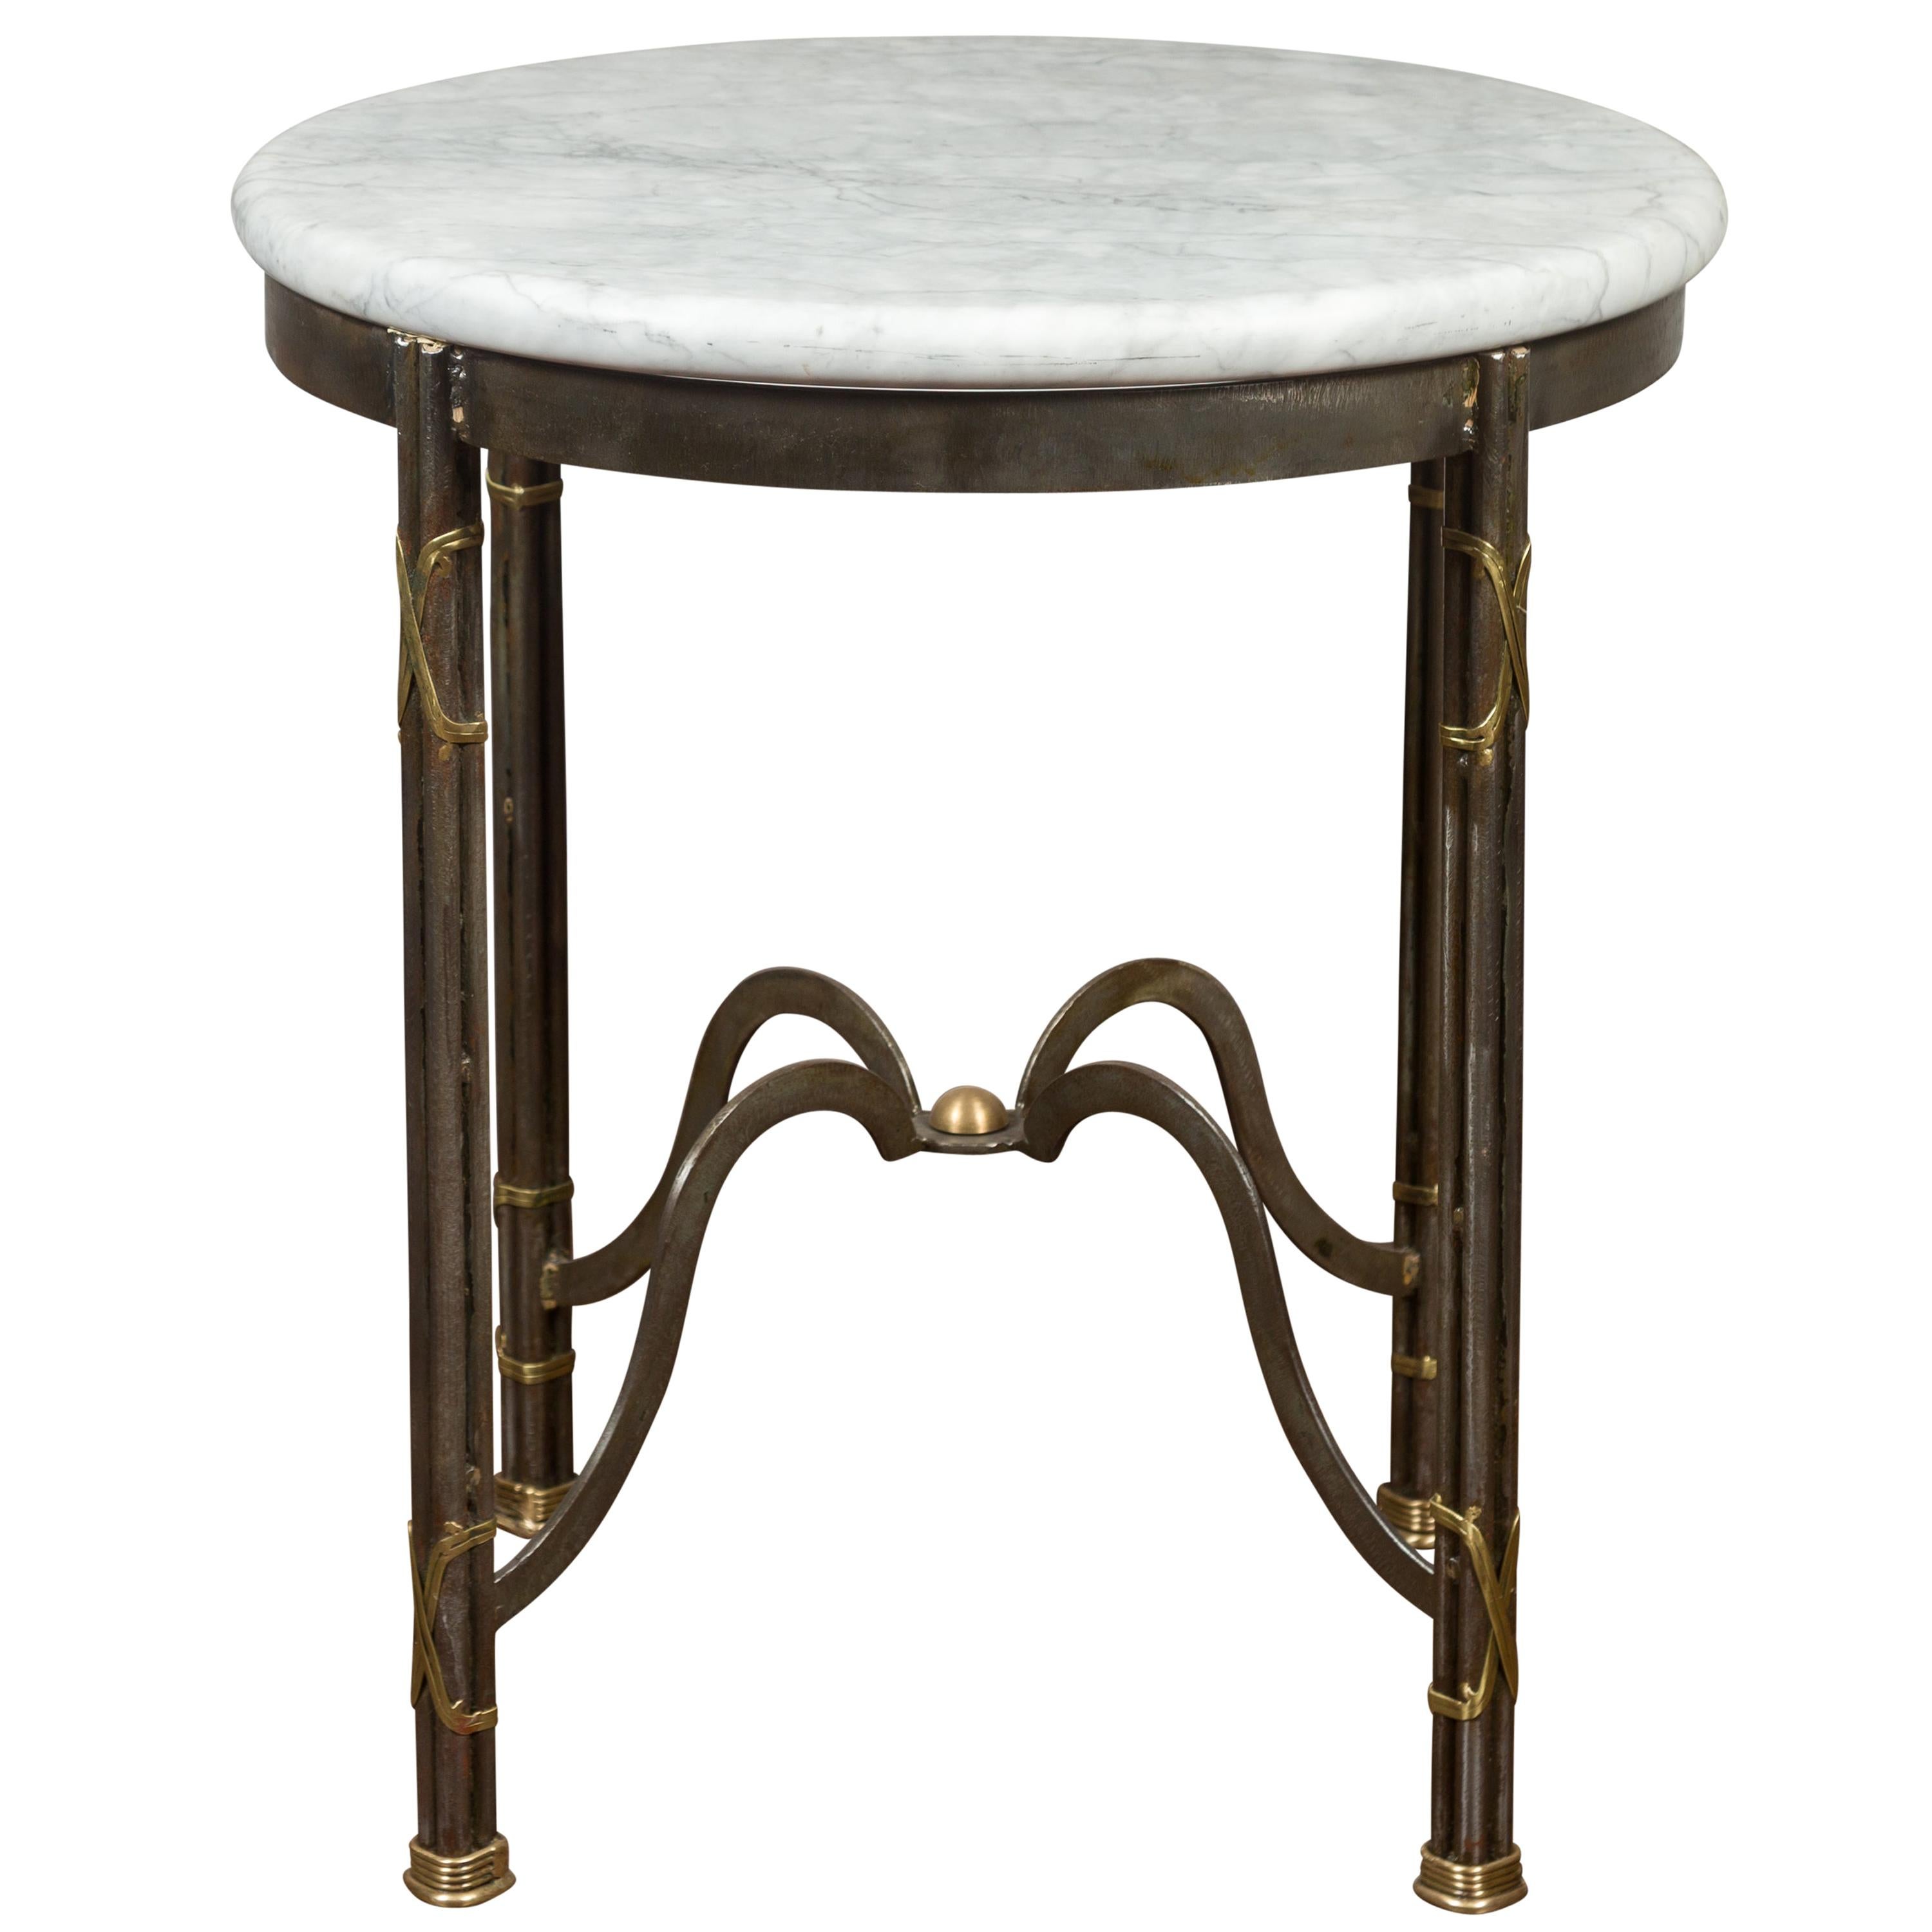 Midcentury French Polished Steel Side Table with Round White Marble Top